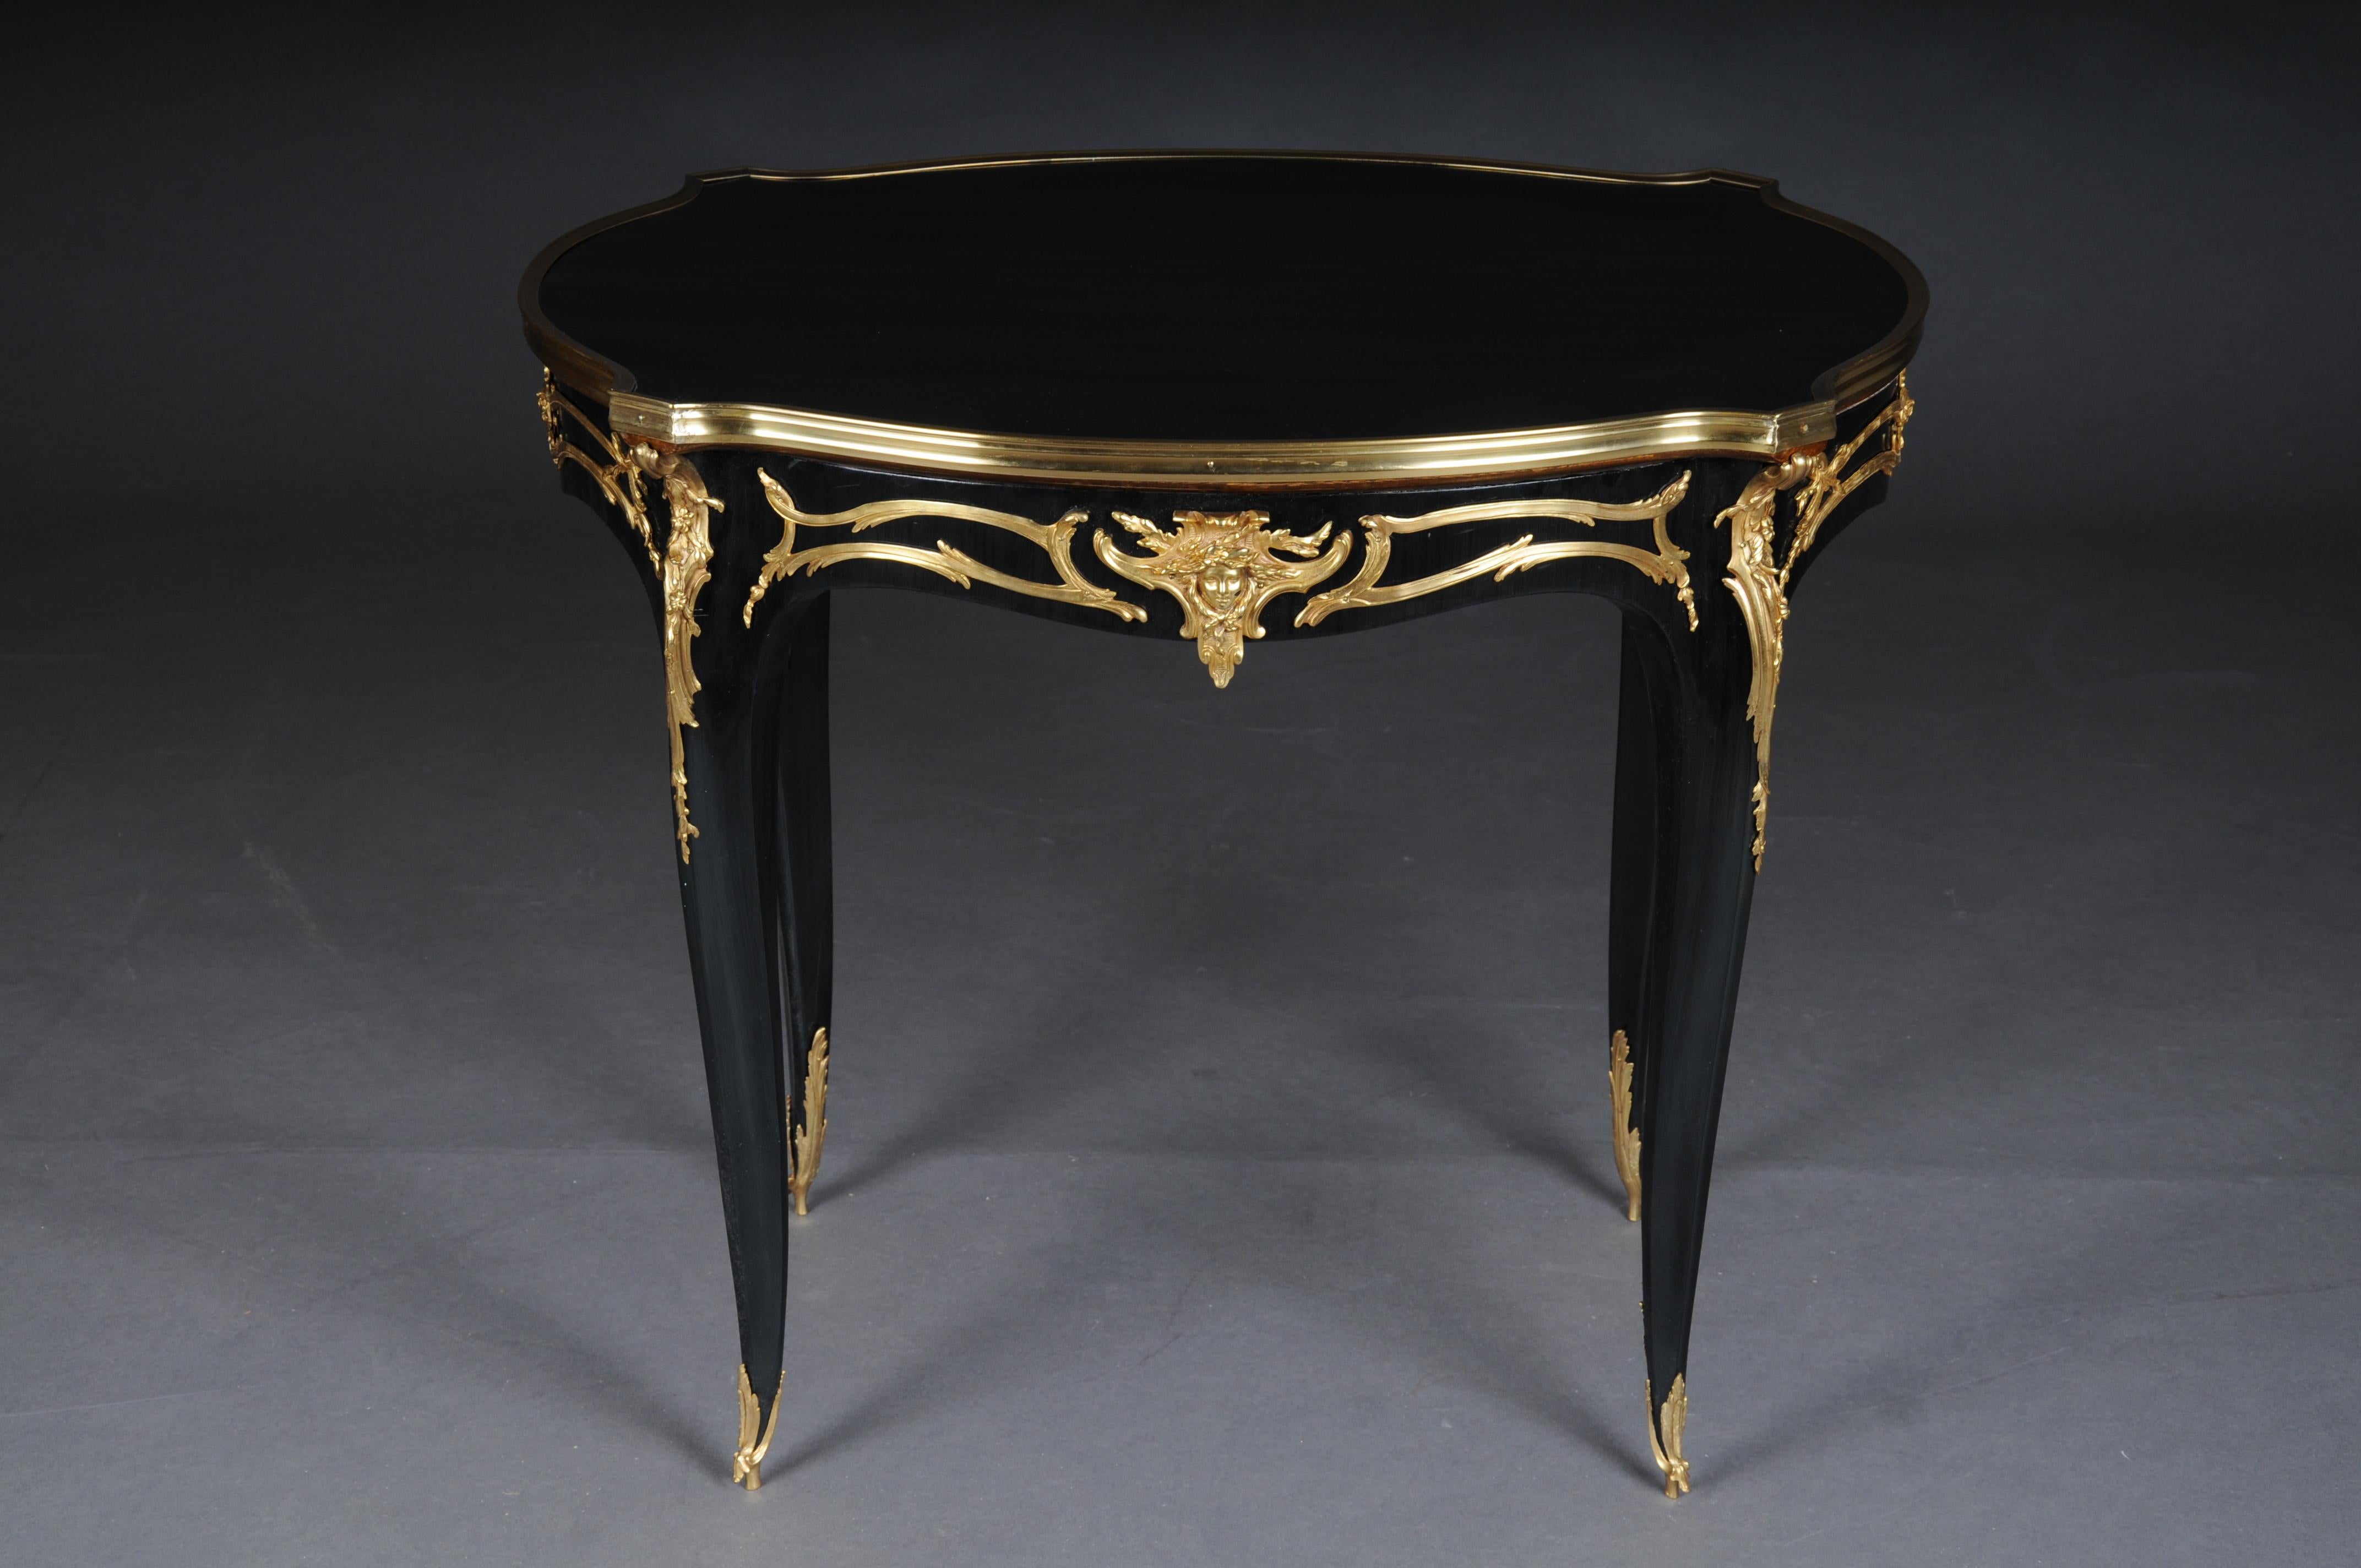 20th Century royal side table after Francois Linke, Paris, black gold

Majestic side table with extremely finely chased and gold-plated bronze fittings. Slightly convex and concave curved body, flanked by extended corner pilasters on high,